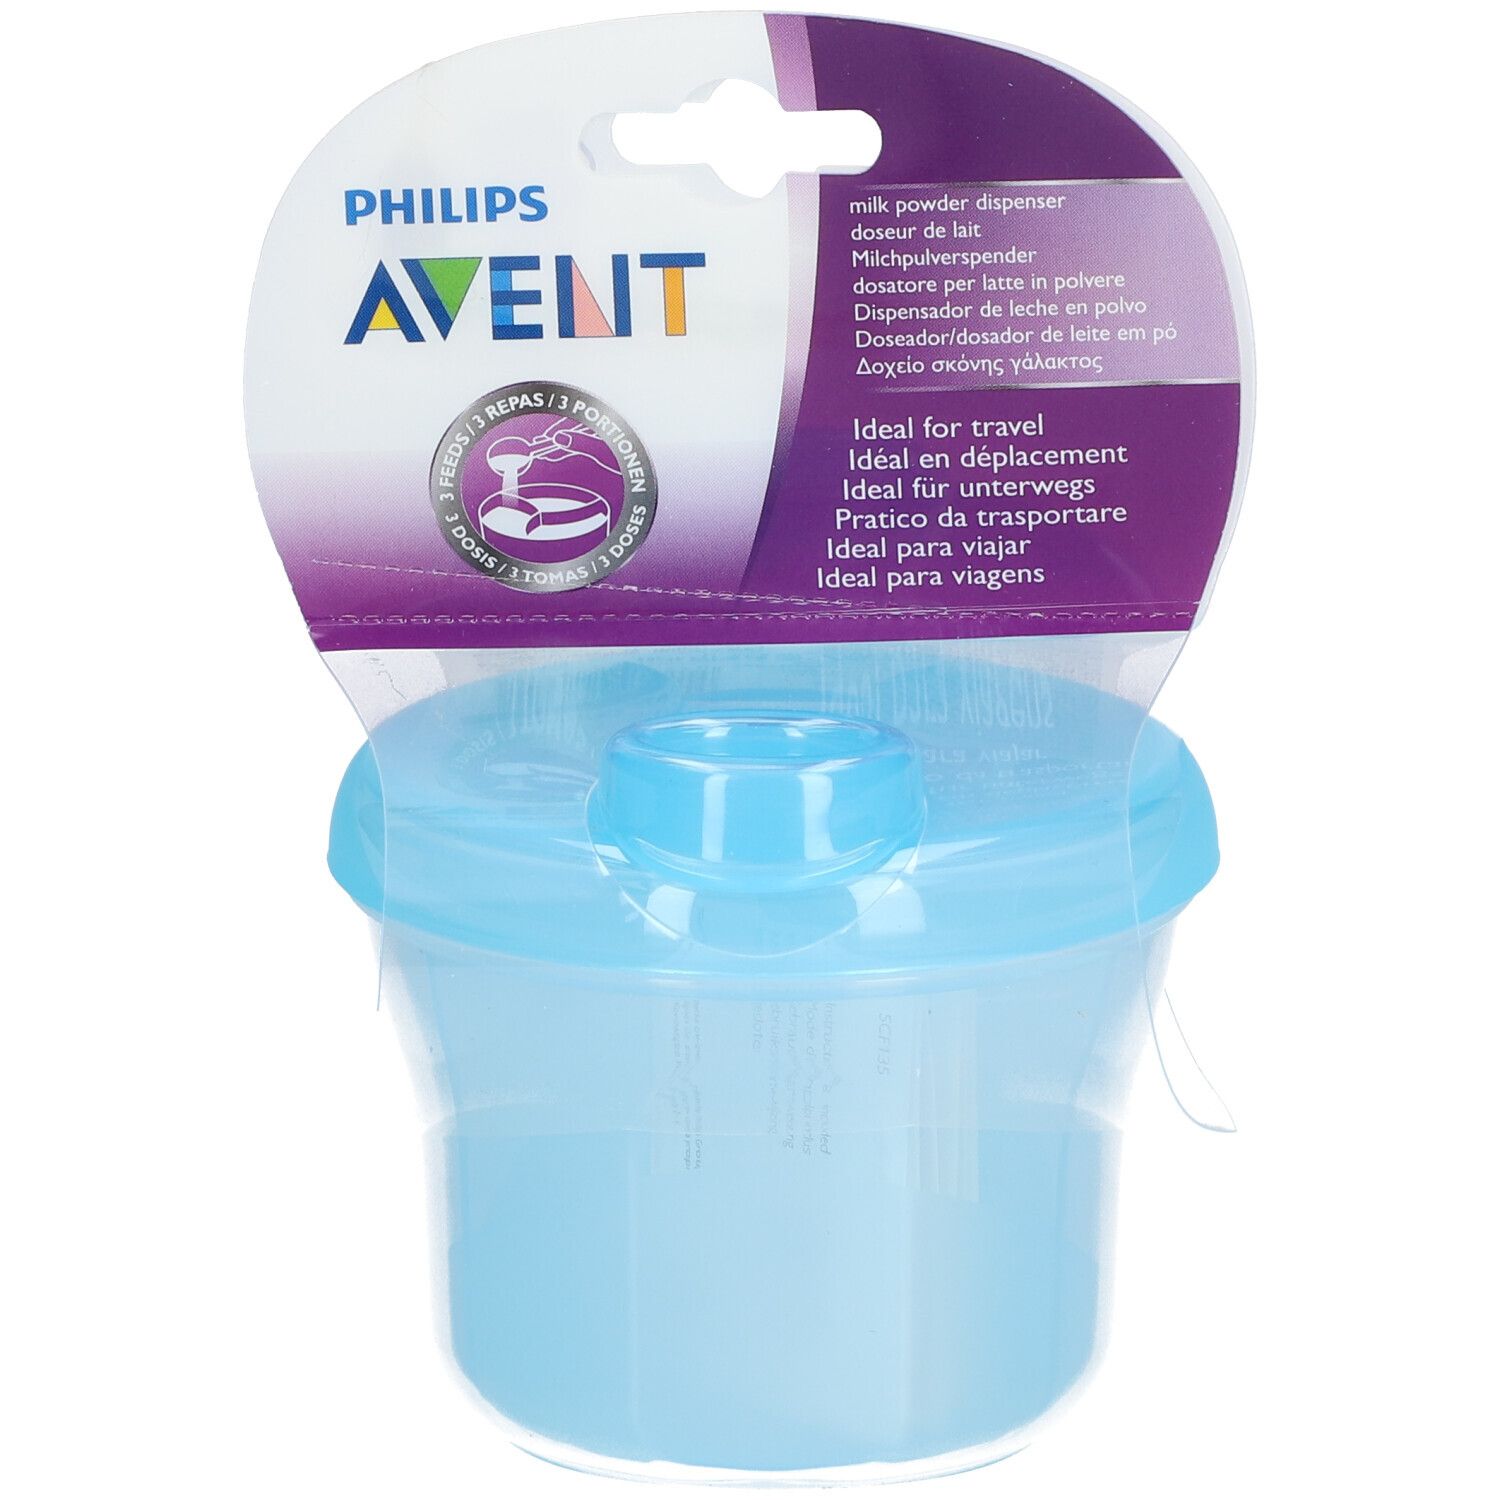 Image of Philips® AVENT Milchpulverspender